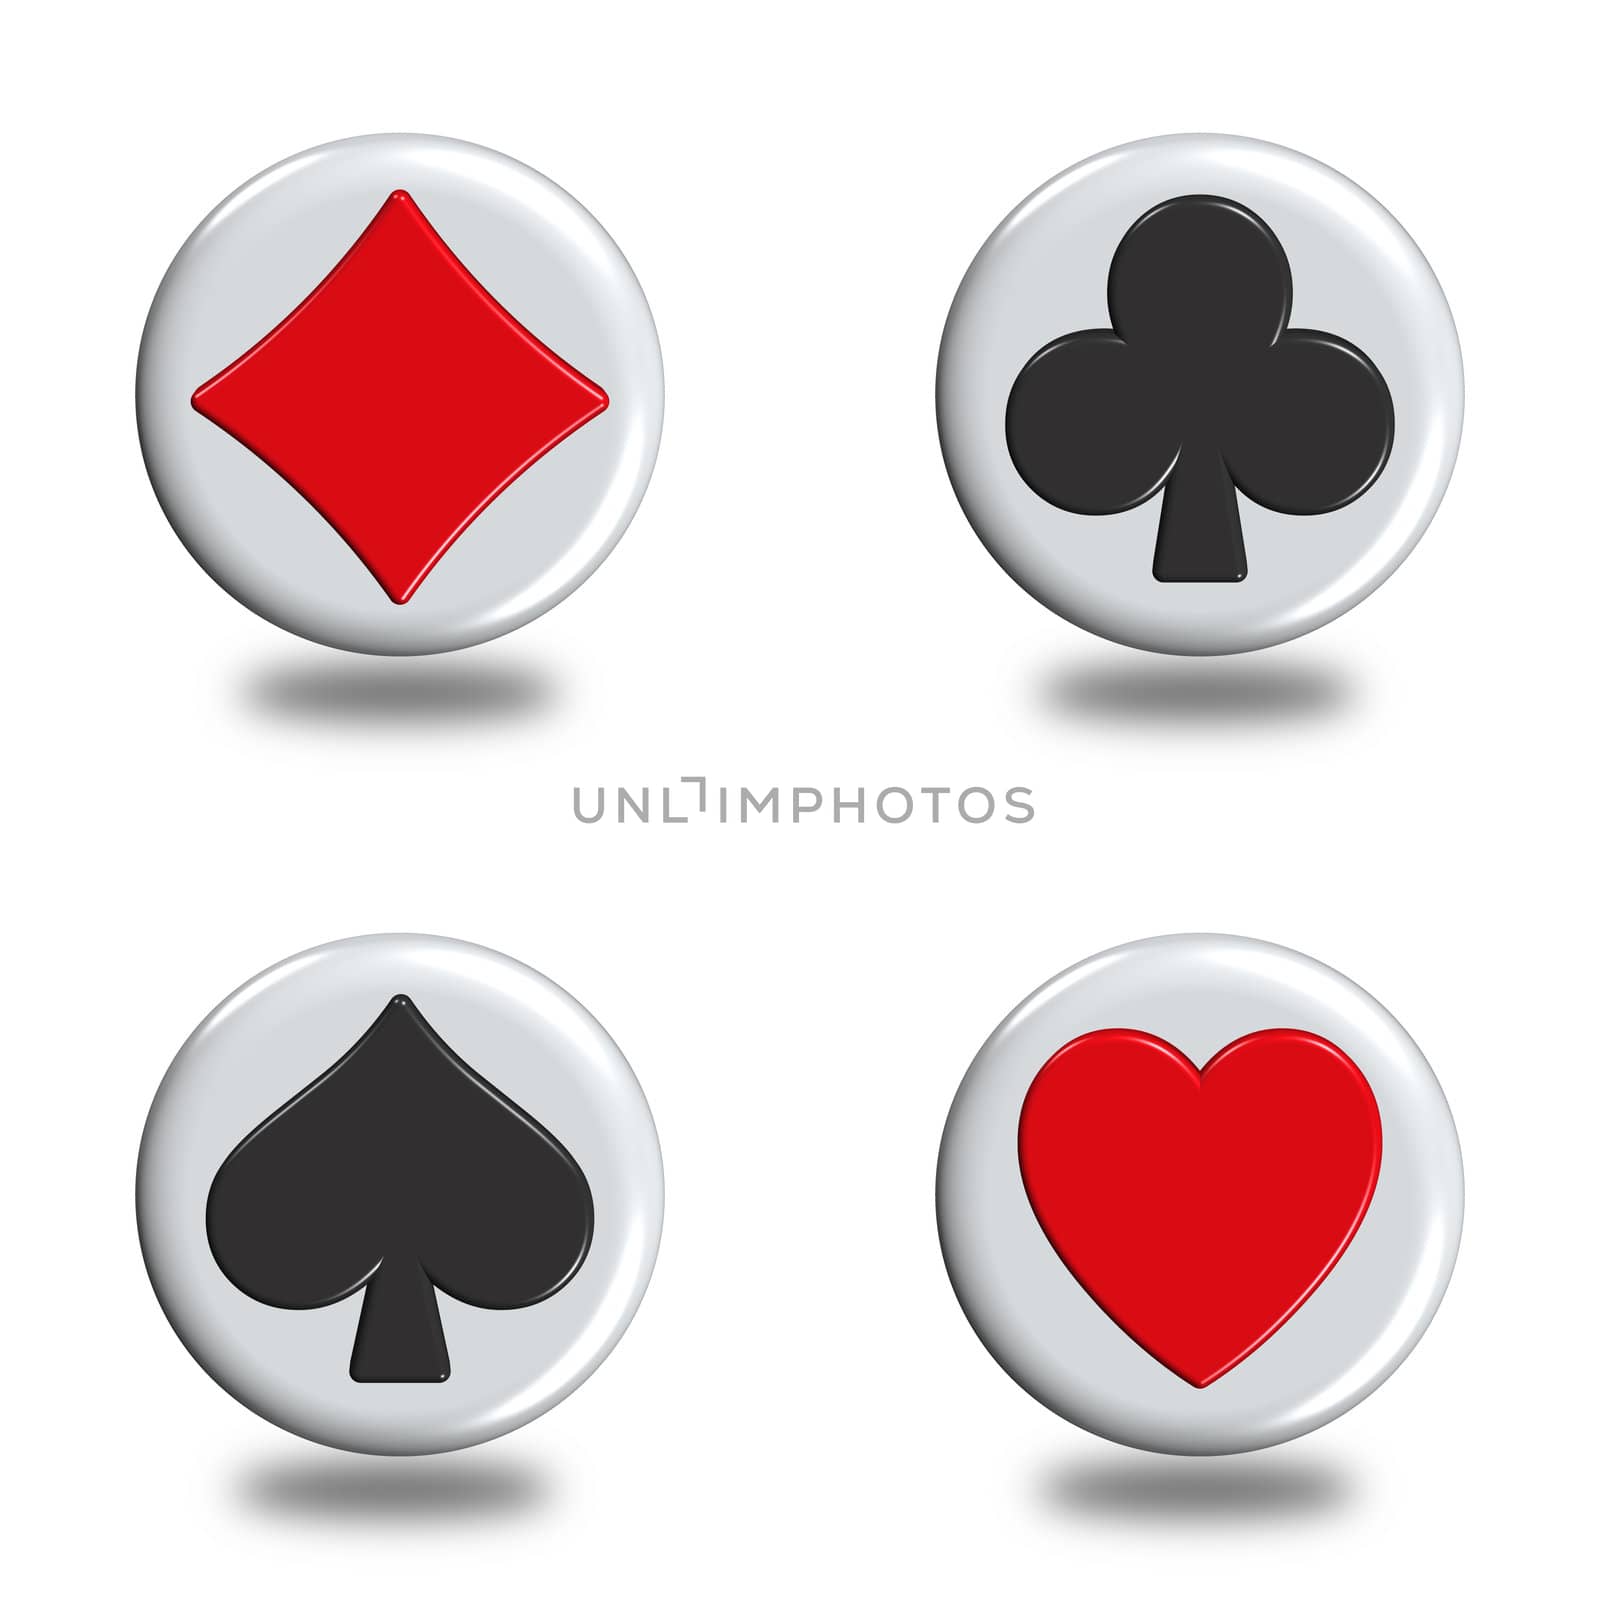 illustration icons or buttons of the four signs poker
